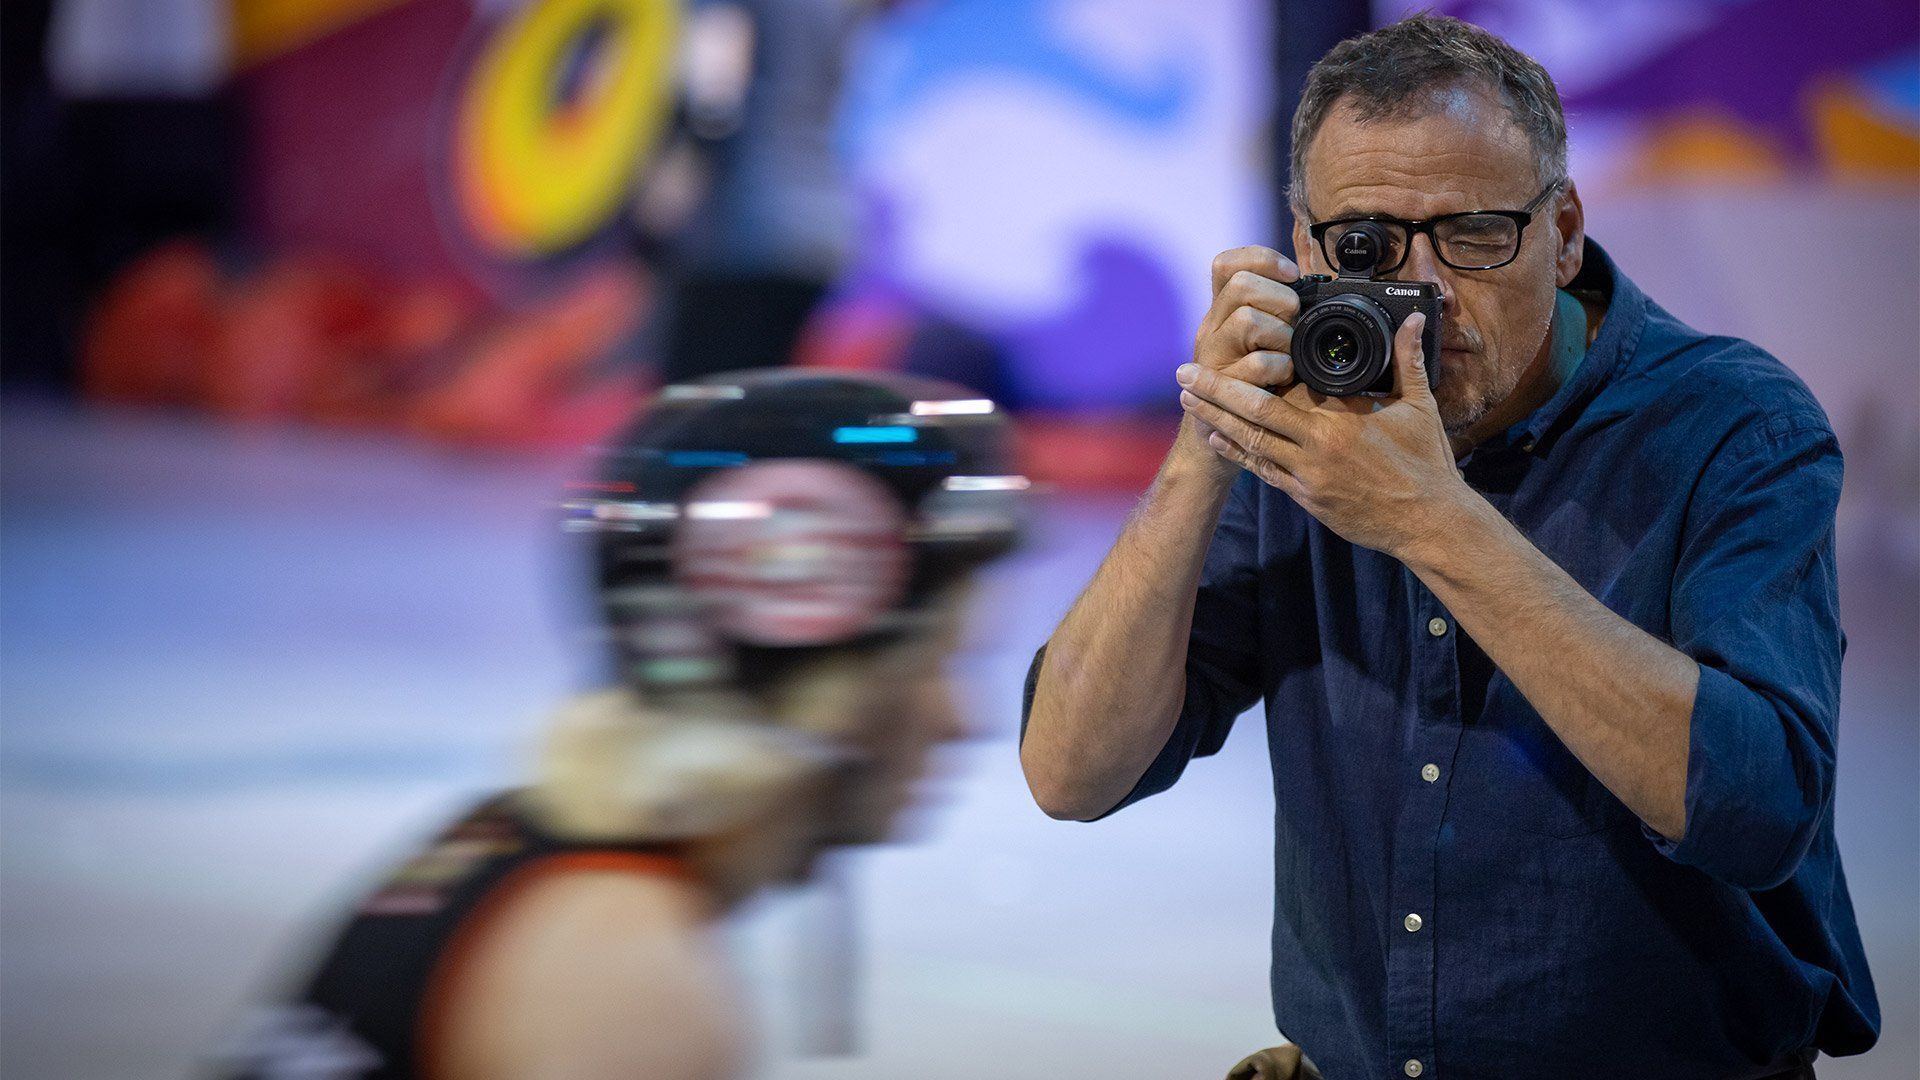 Photographer Piotr Malecki is in sharp focus as he photographs a fast-moving roller skater, who is blurred.